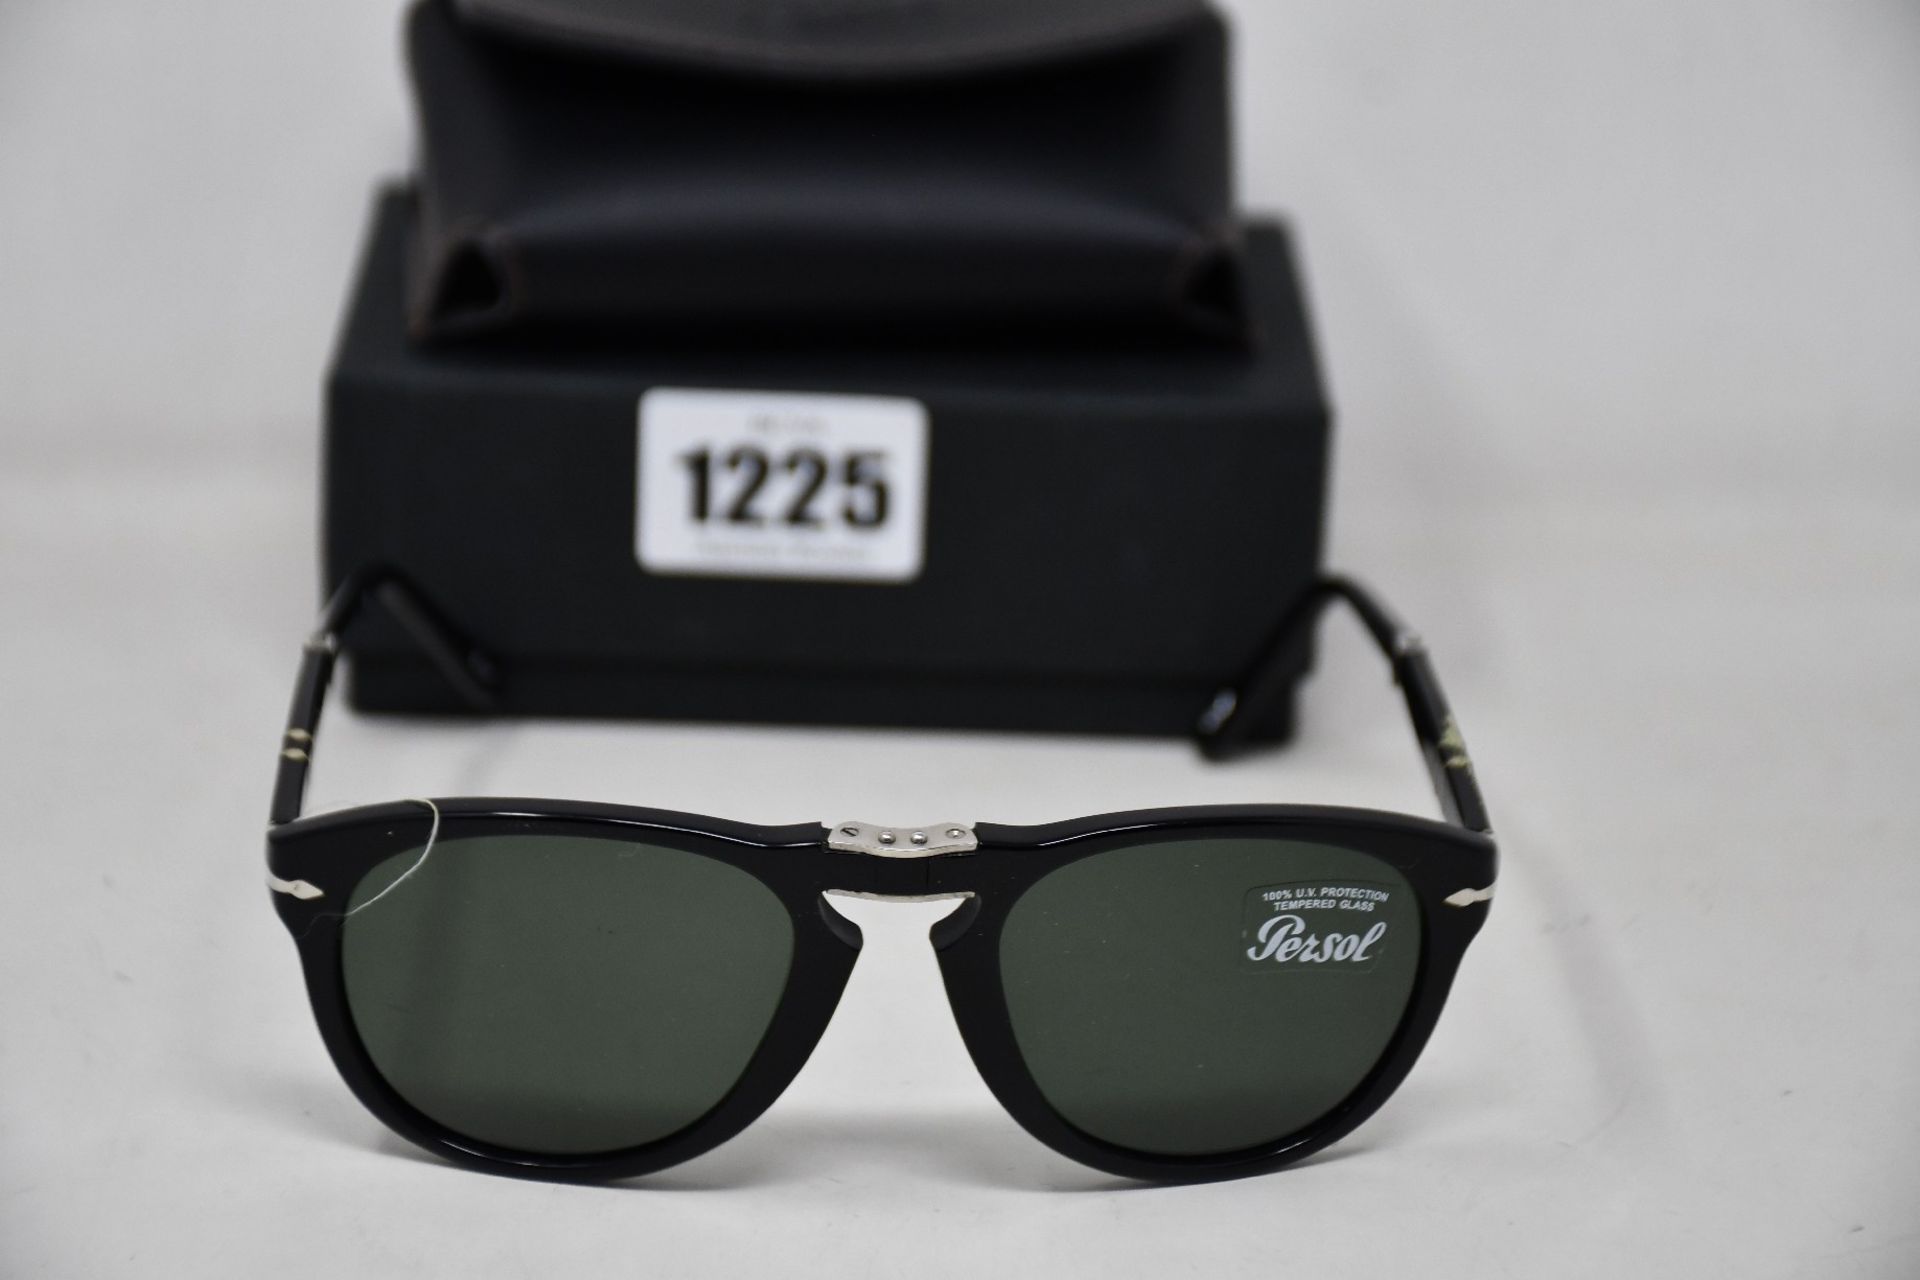 A pair of as new Persol PO0714 folding sunglasses.